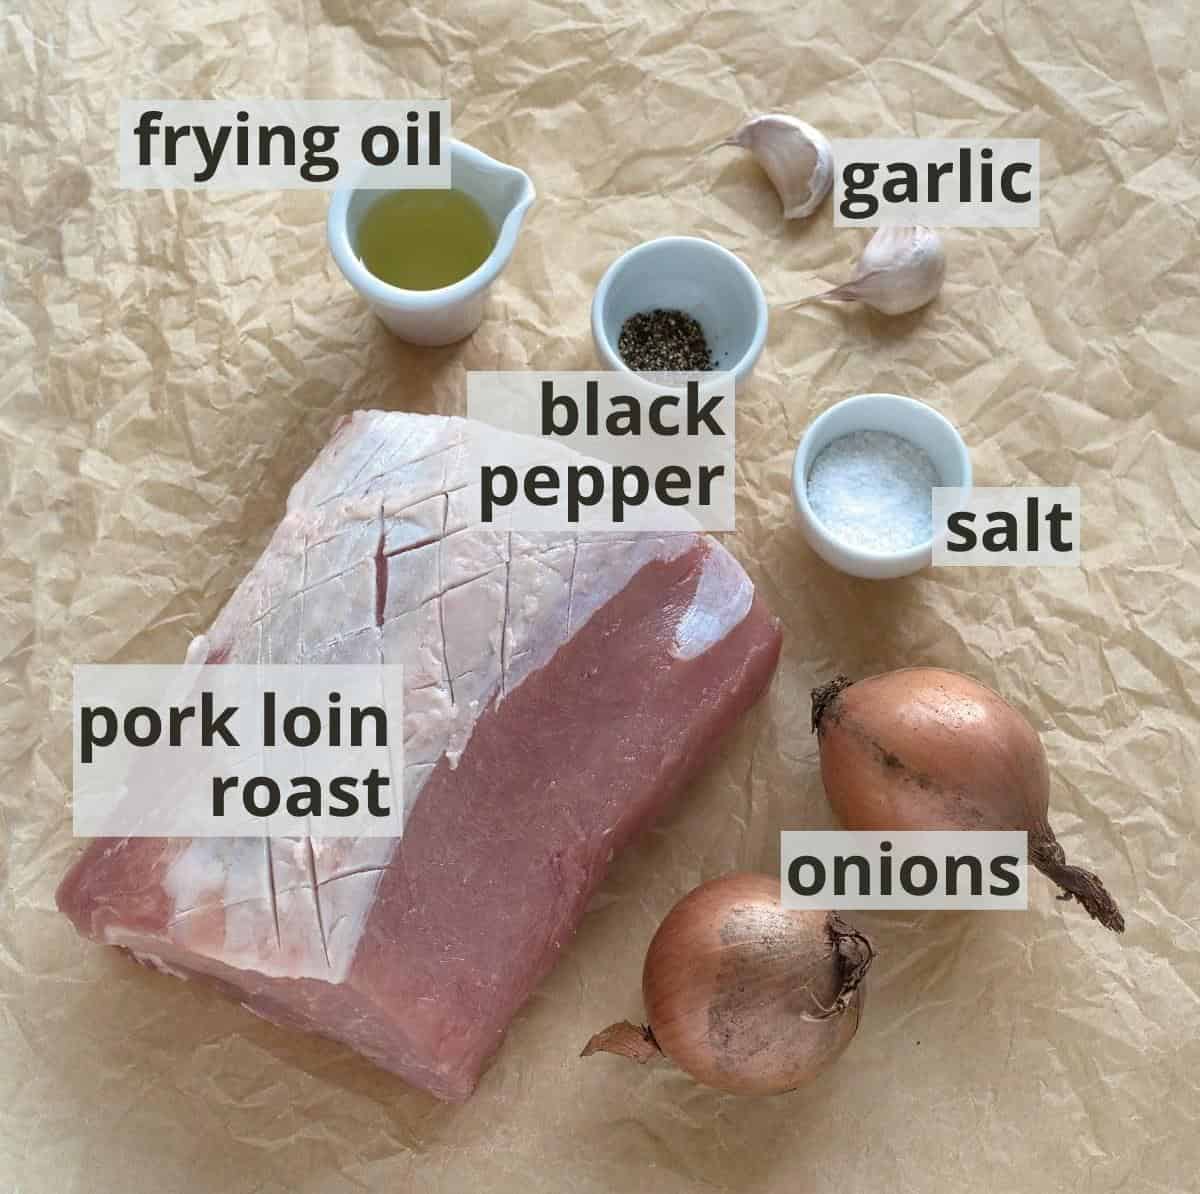 Ingredients for pork loin roast, including captions.